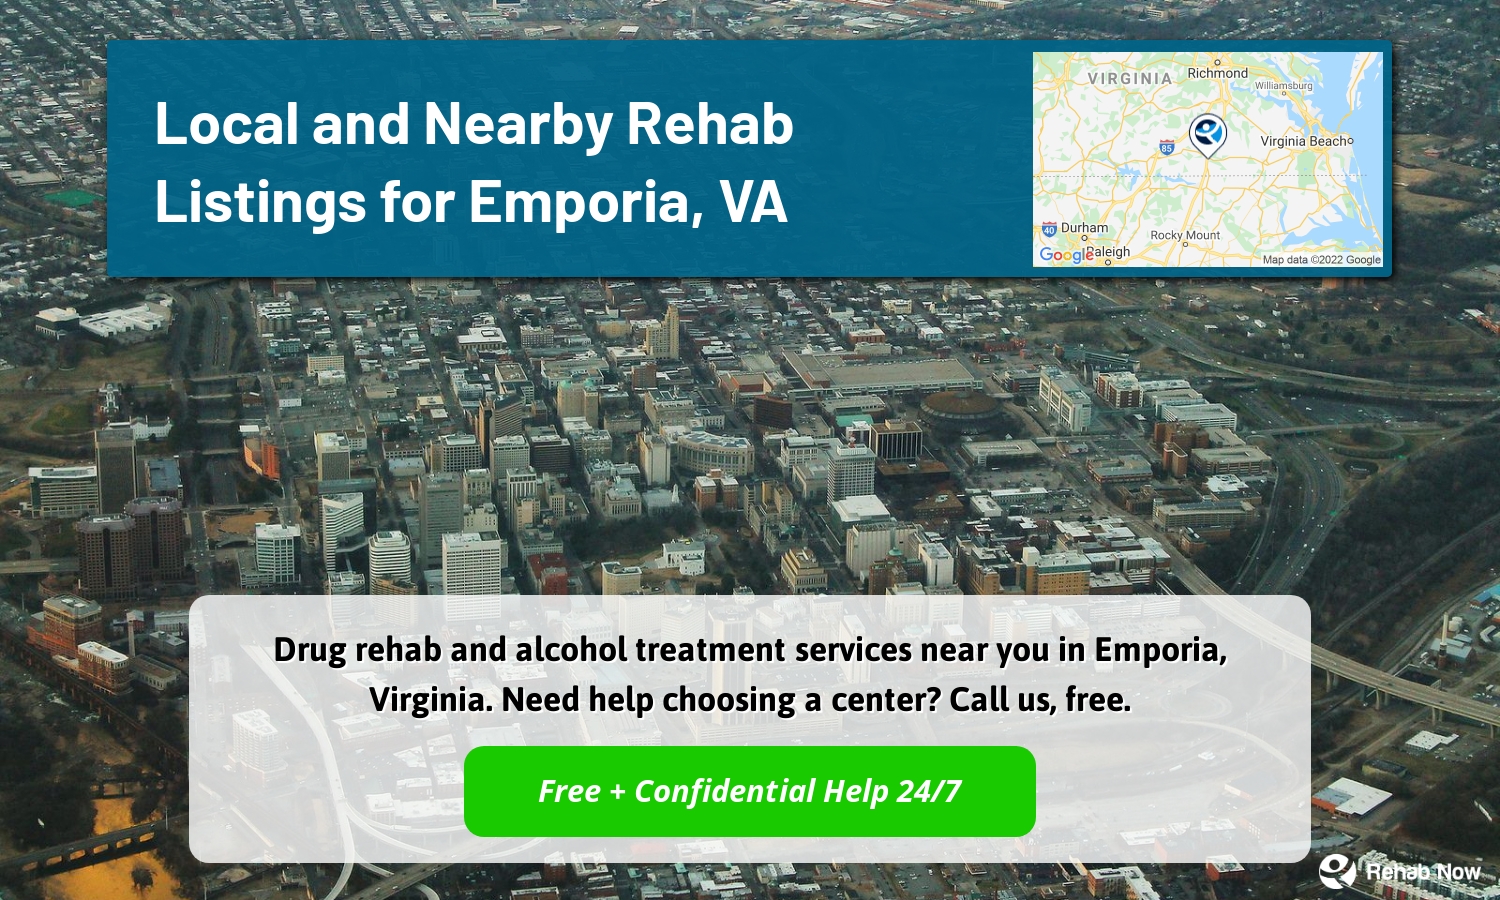 Drug rehab and alcohol treatment services near you in Emporia, Virginia. Need help choosing a center? Call us, free.